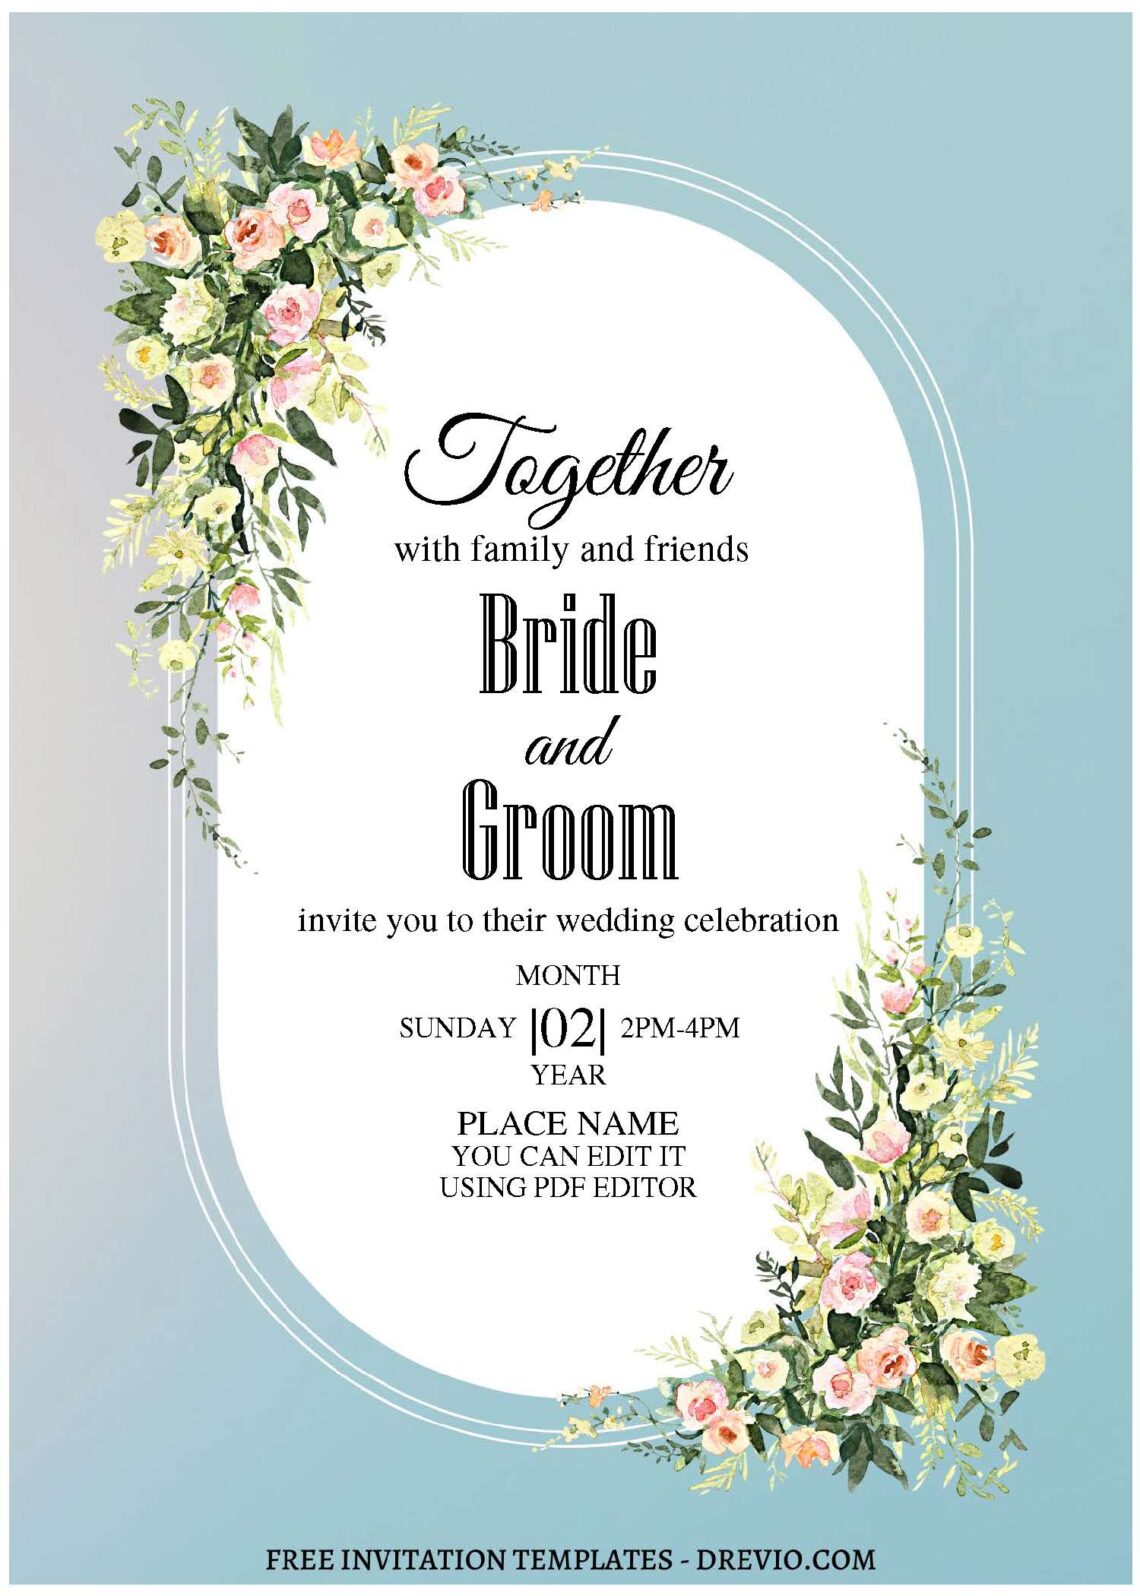 (Free Editable PDF) Soft & Muted Watercolor Floral Wedding Invitation Templates with pale pink background